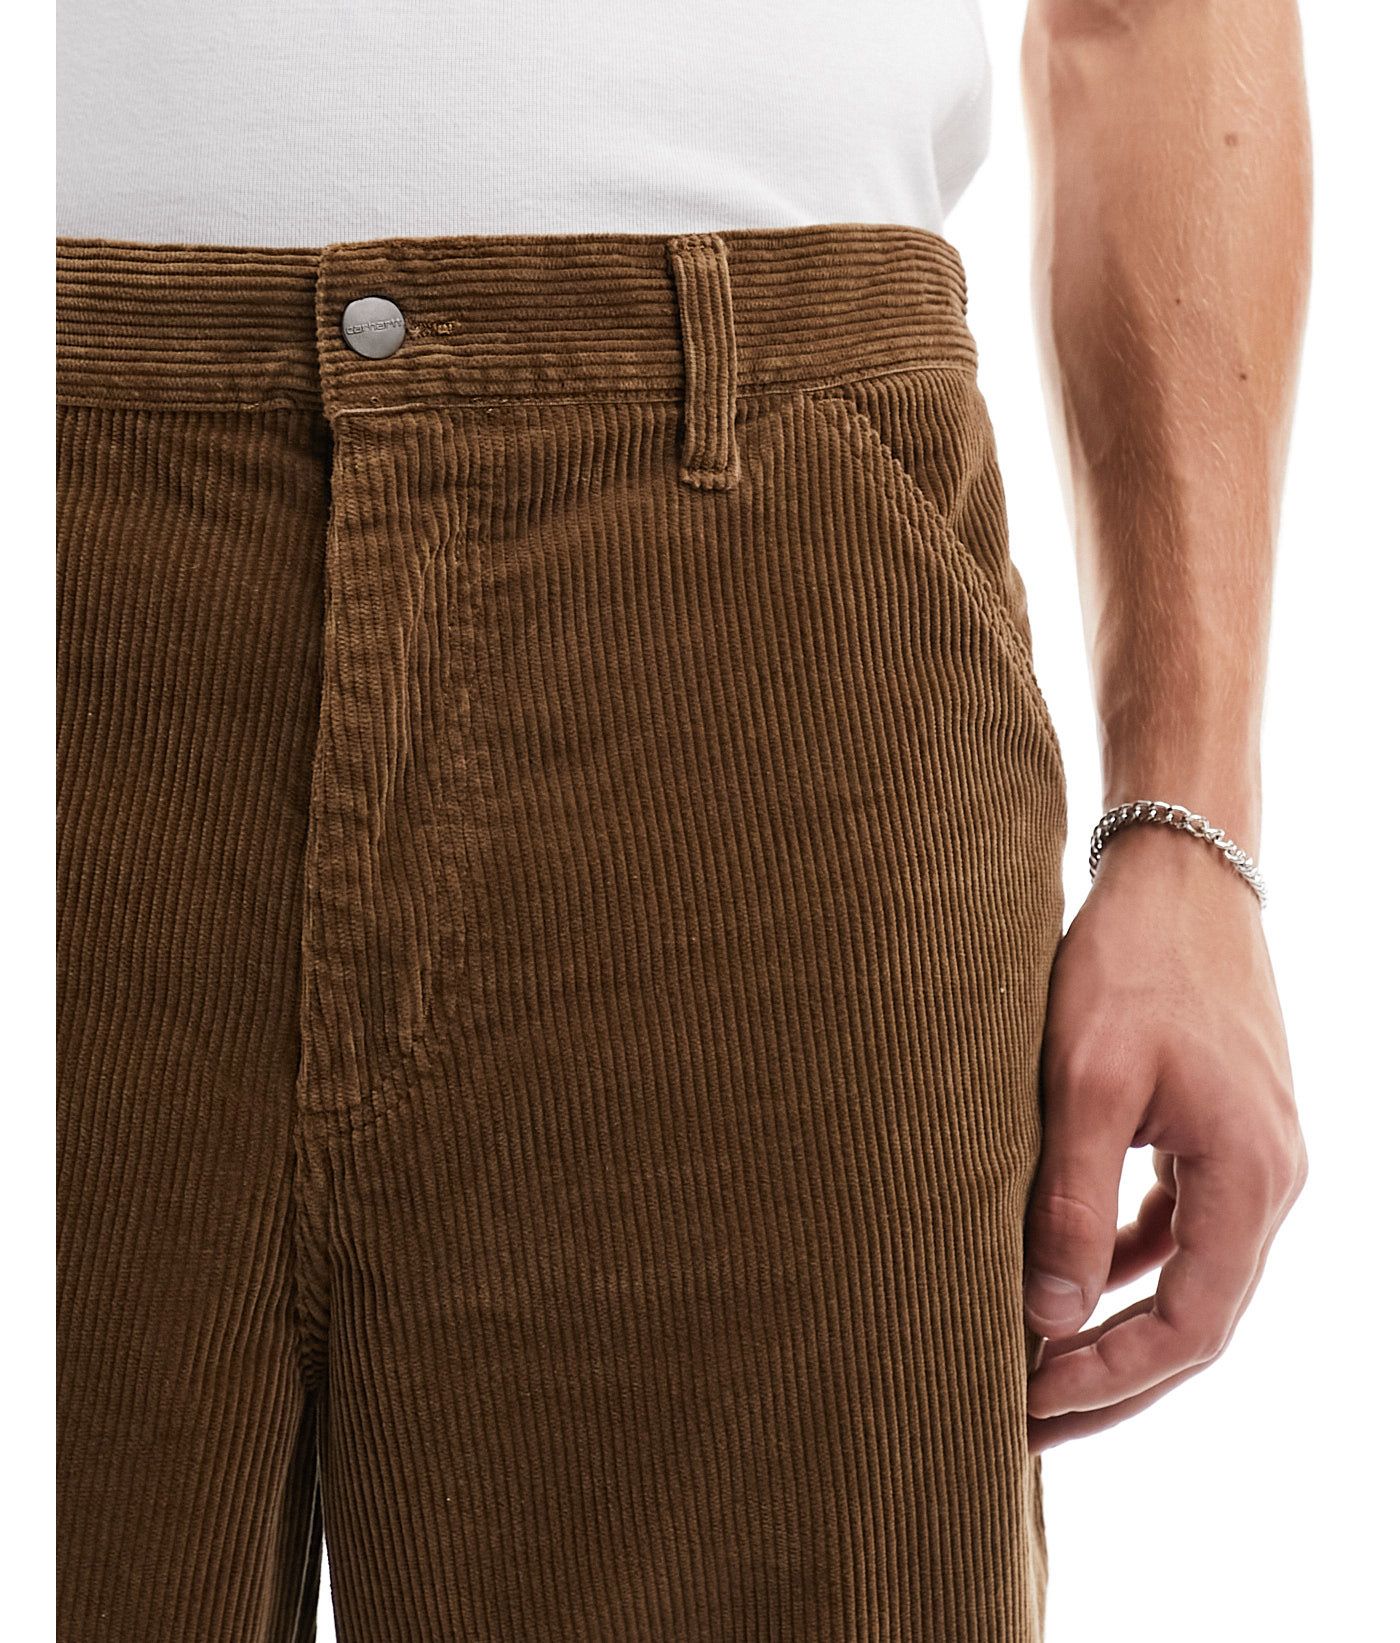 Carhartt WIP single knee corduroy relaxed straight trousers in brown